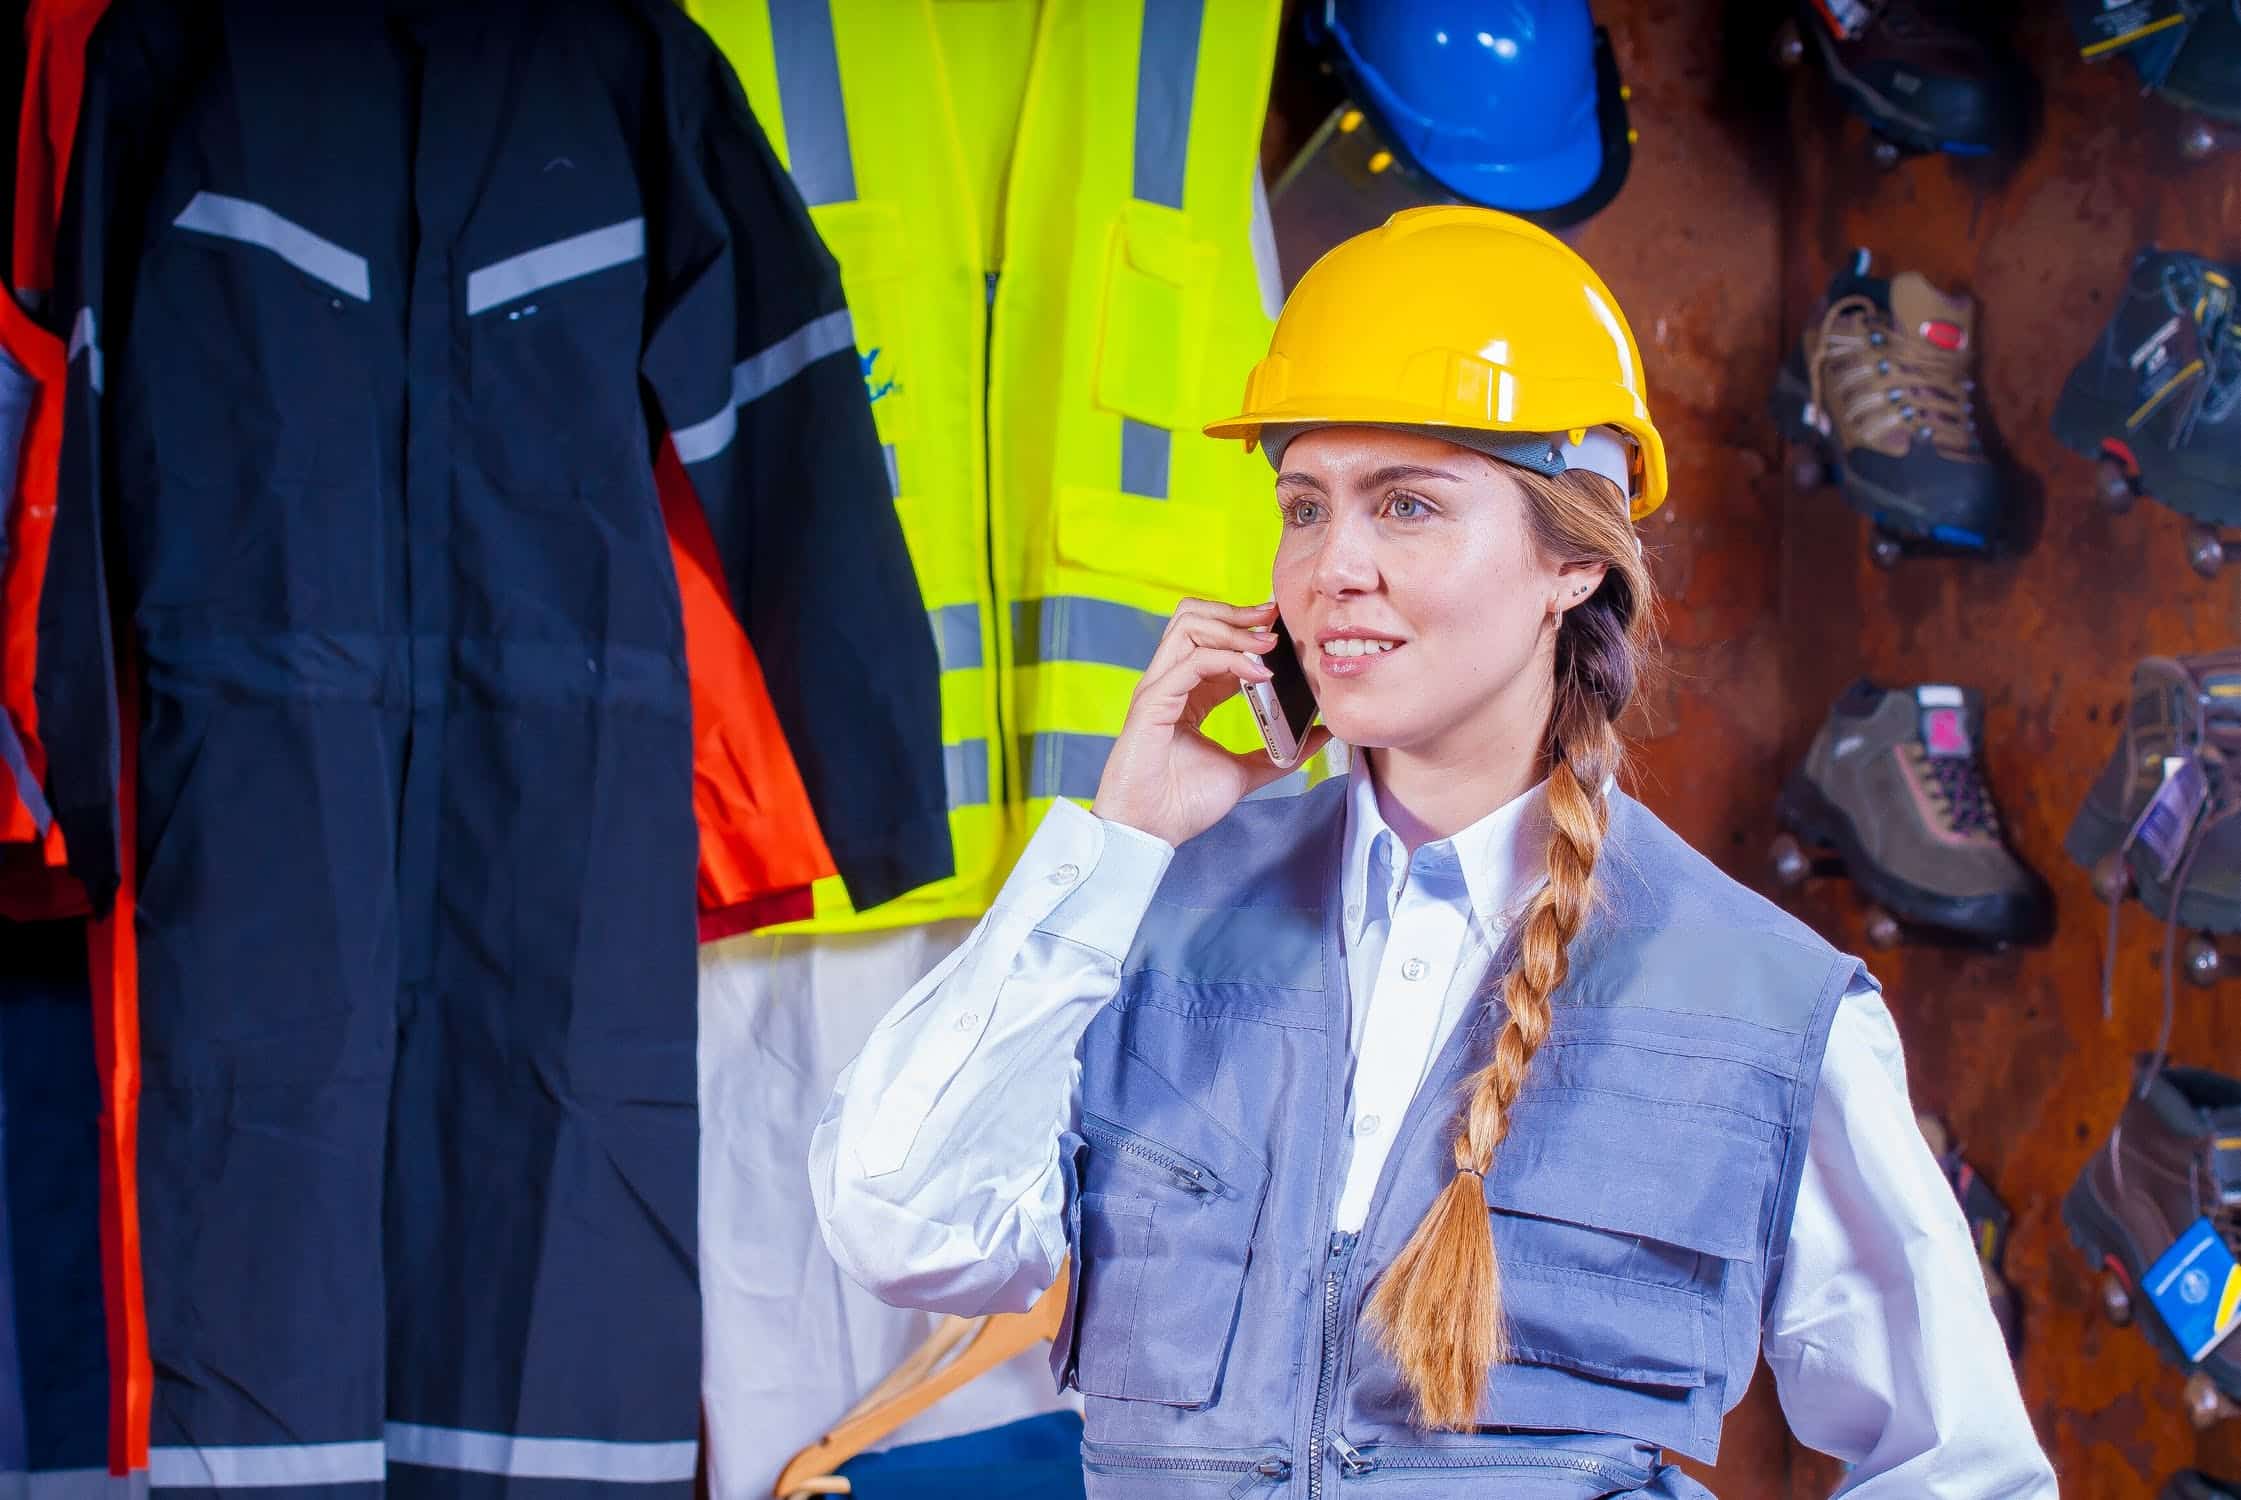 Mobile field service management is integral for enabling technicians to improve the customer experience